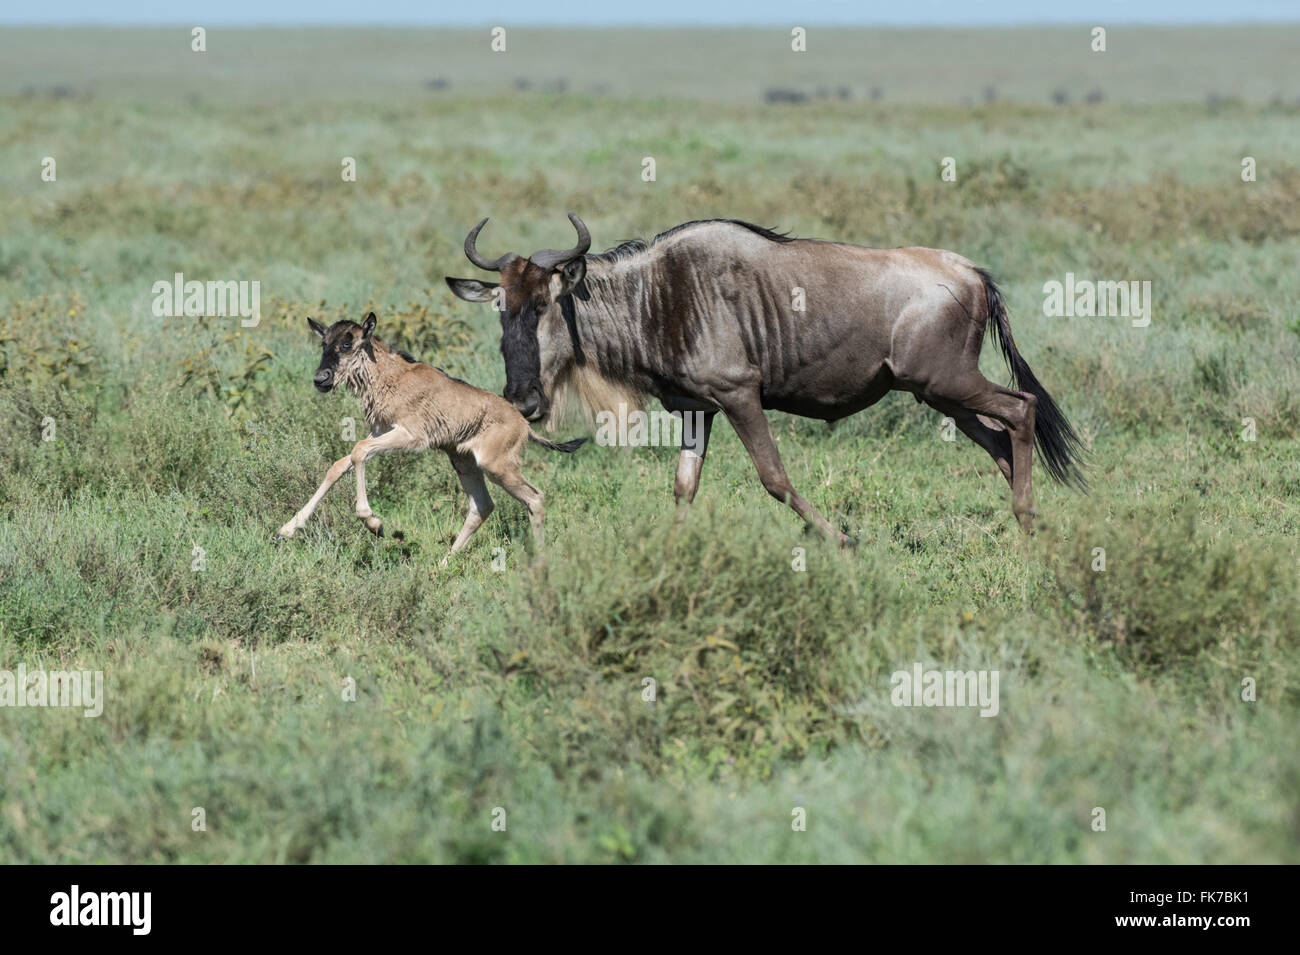 Brindled gnu or common wildebeest (Connochaetes taurinus). Mother and calf shortly after birth Stock Photo